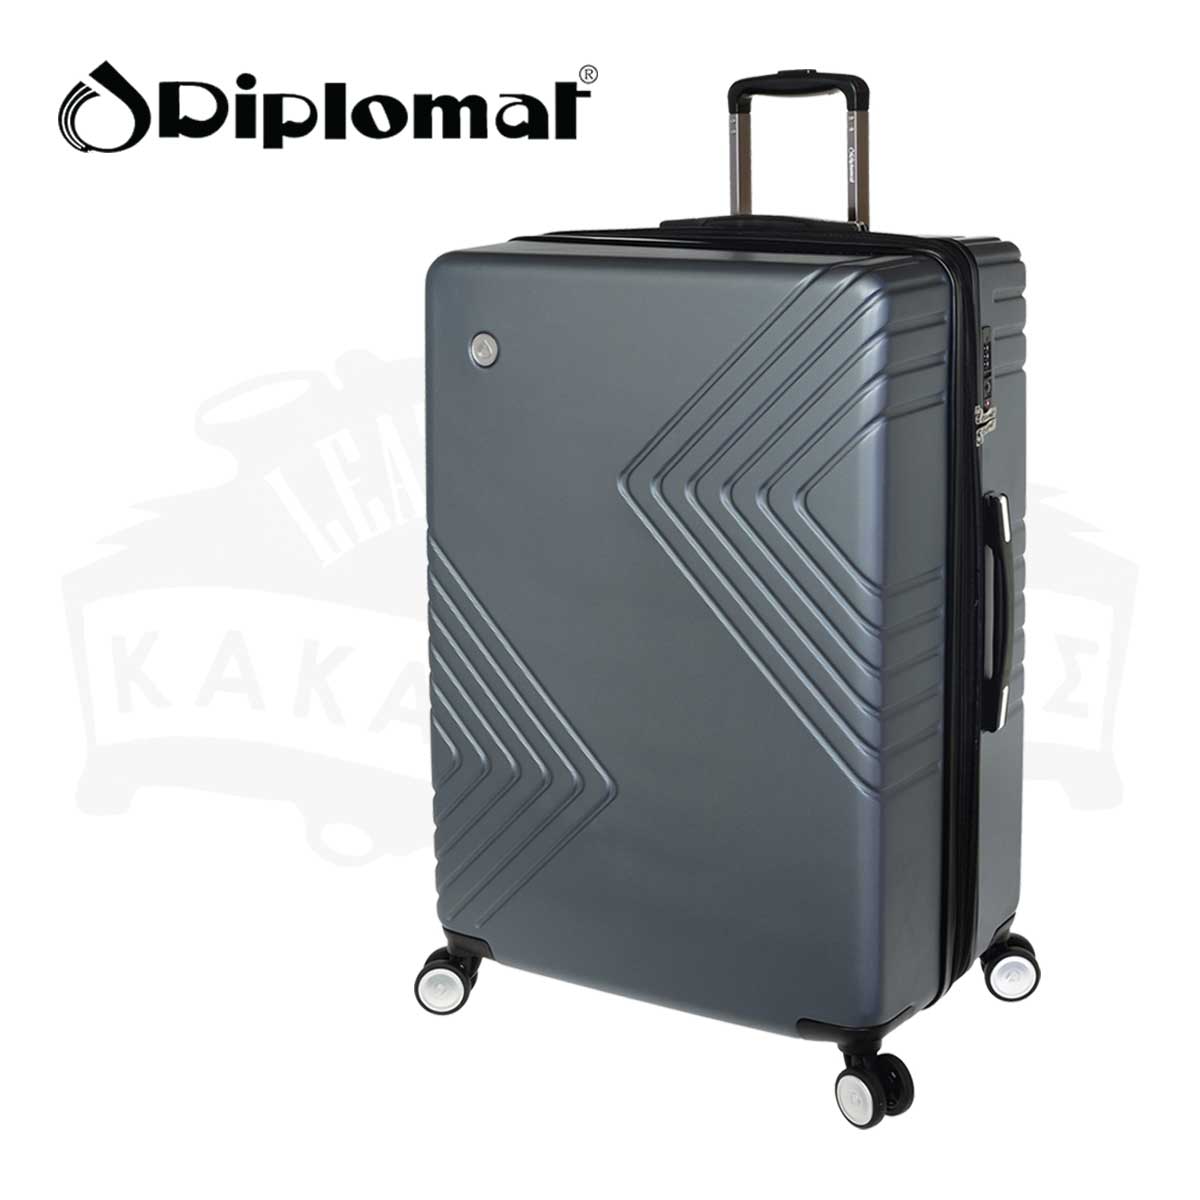 Suitcase TD21113 The Arrow2 Collection - Diplomat